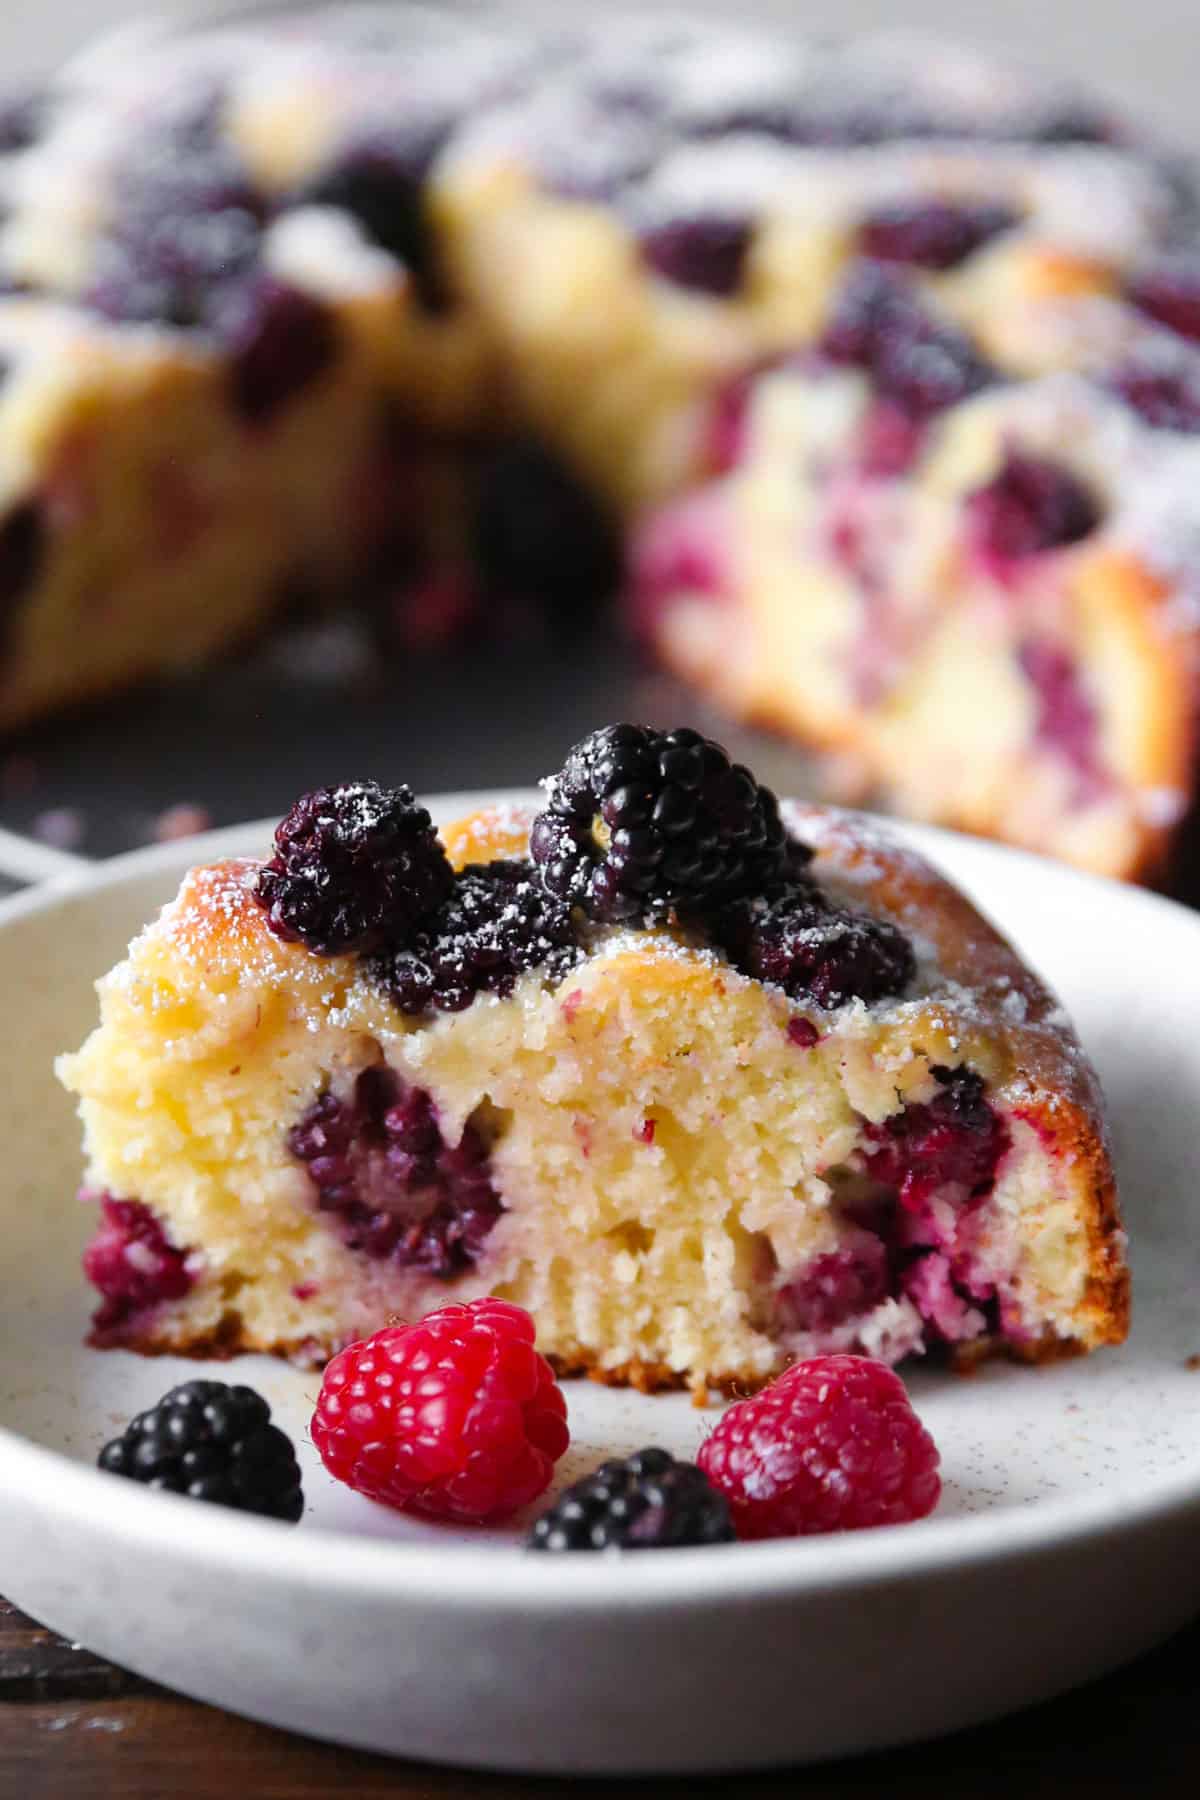 a slice of blackberry cake on a plate.